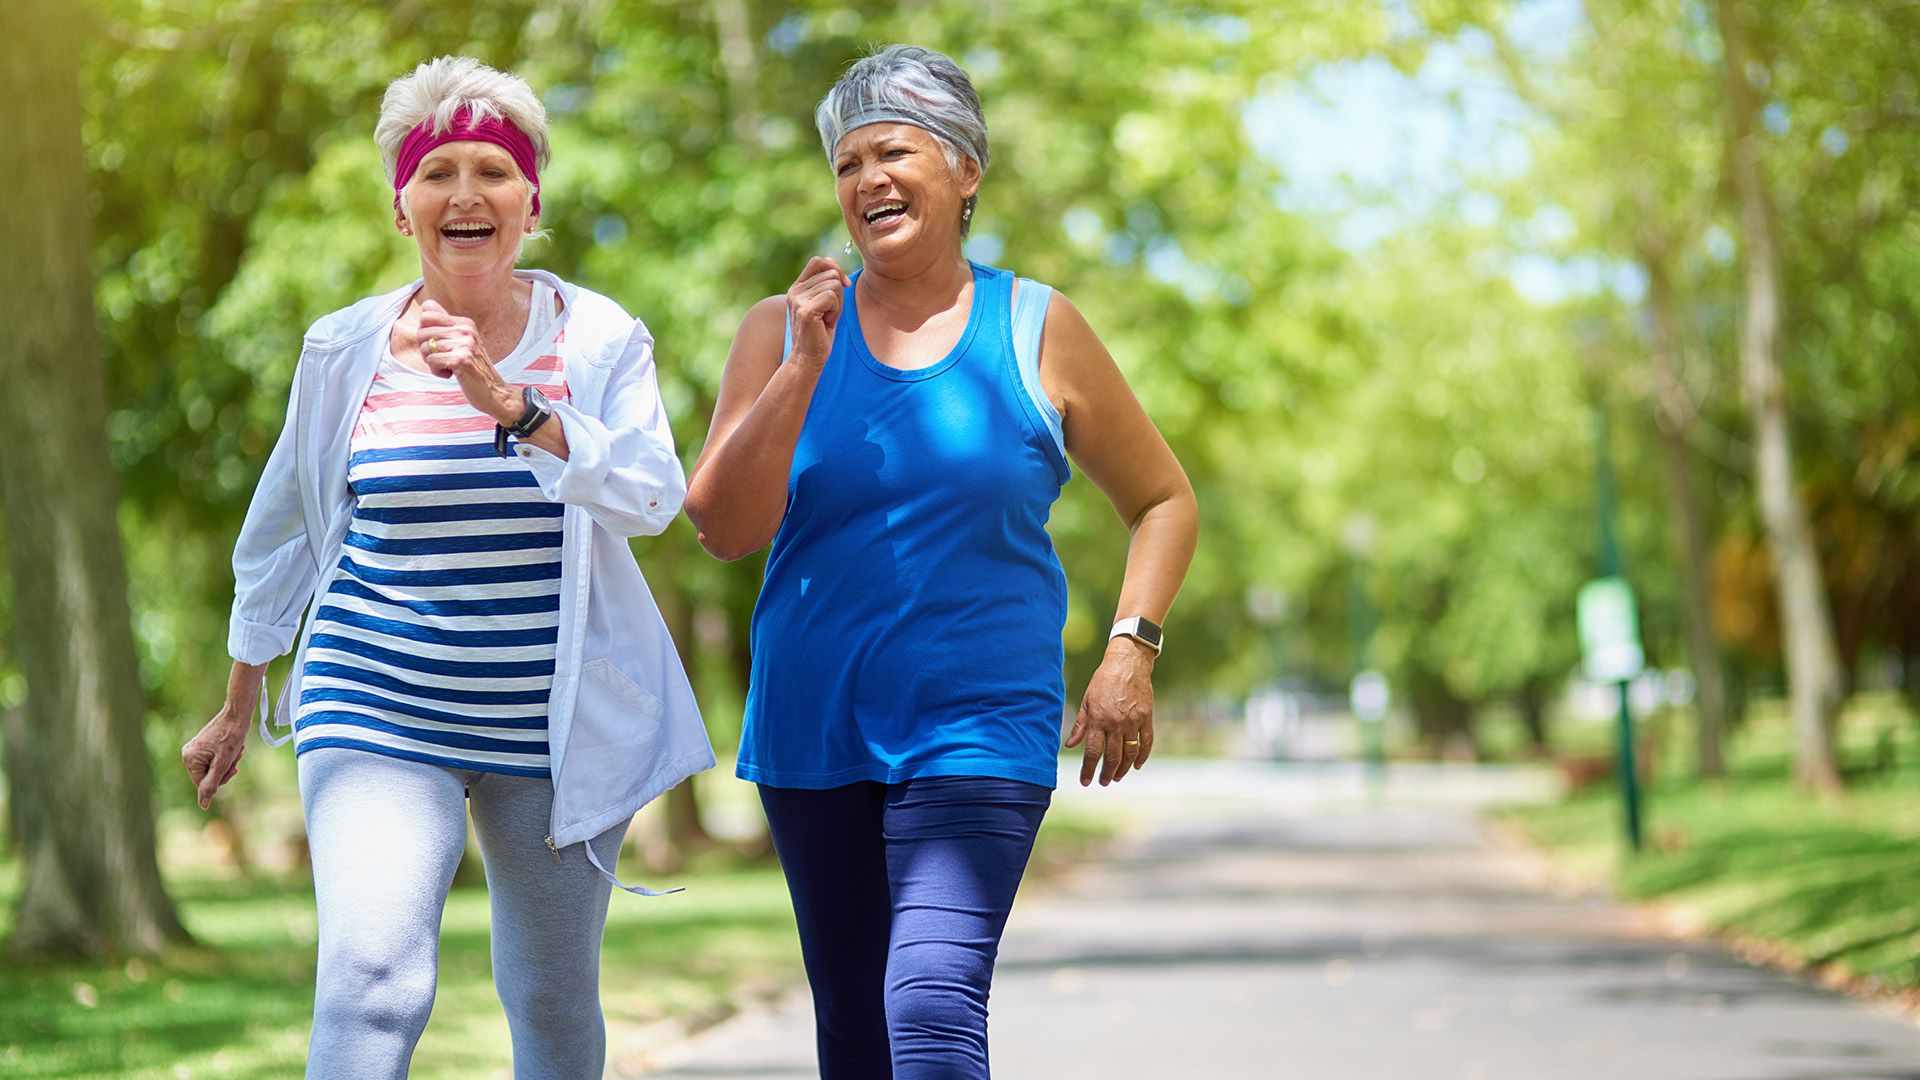 Shot of two elderly friends enjoying a run together outdoors